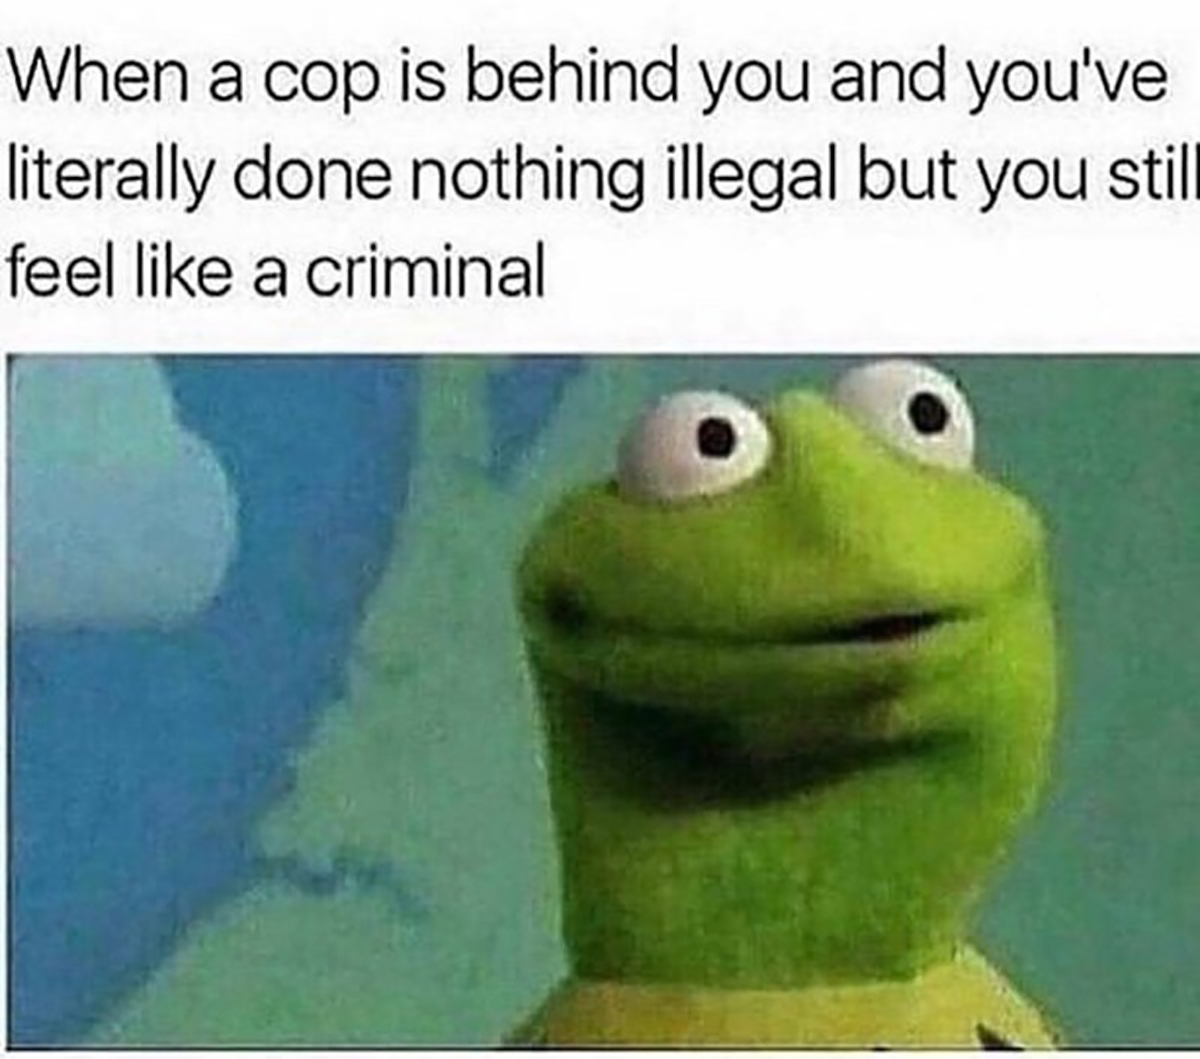 dank memes - kermit memes reddit - When a cop is behind you and you've literally done nothing illegal but you still feel a criminal